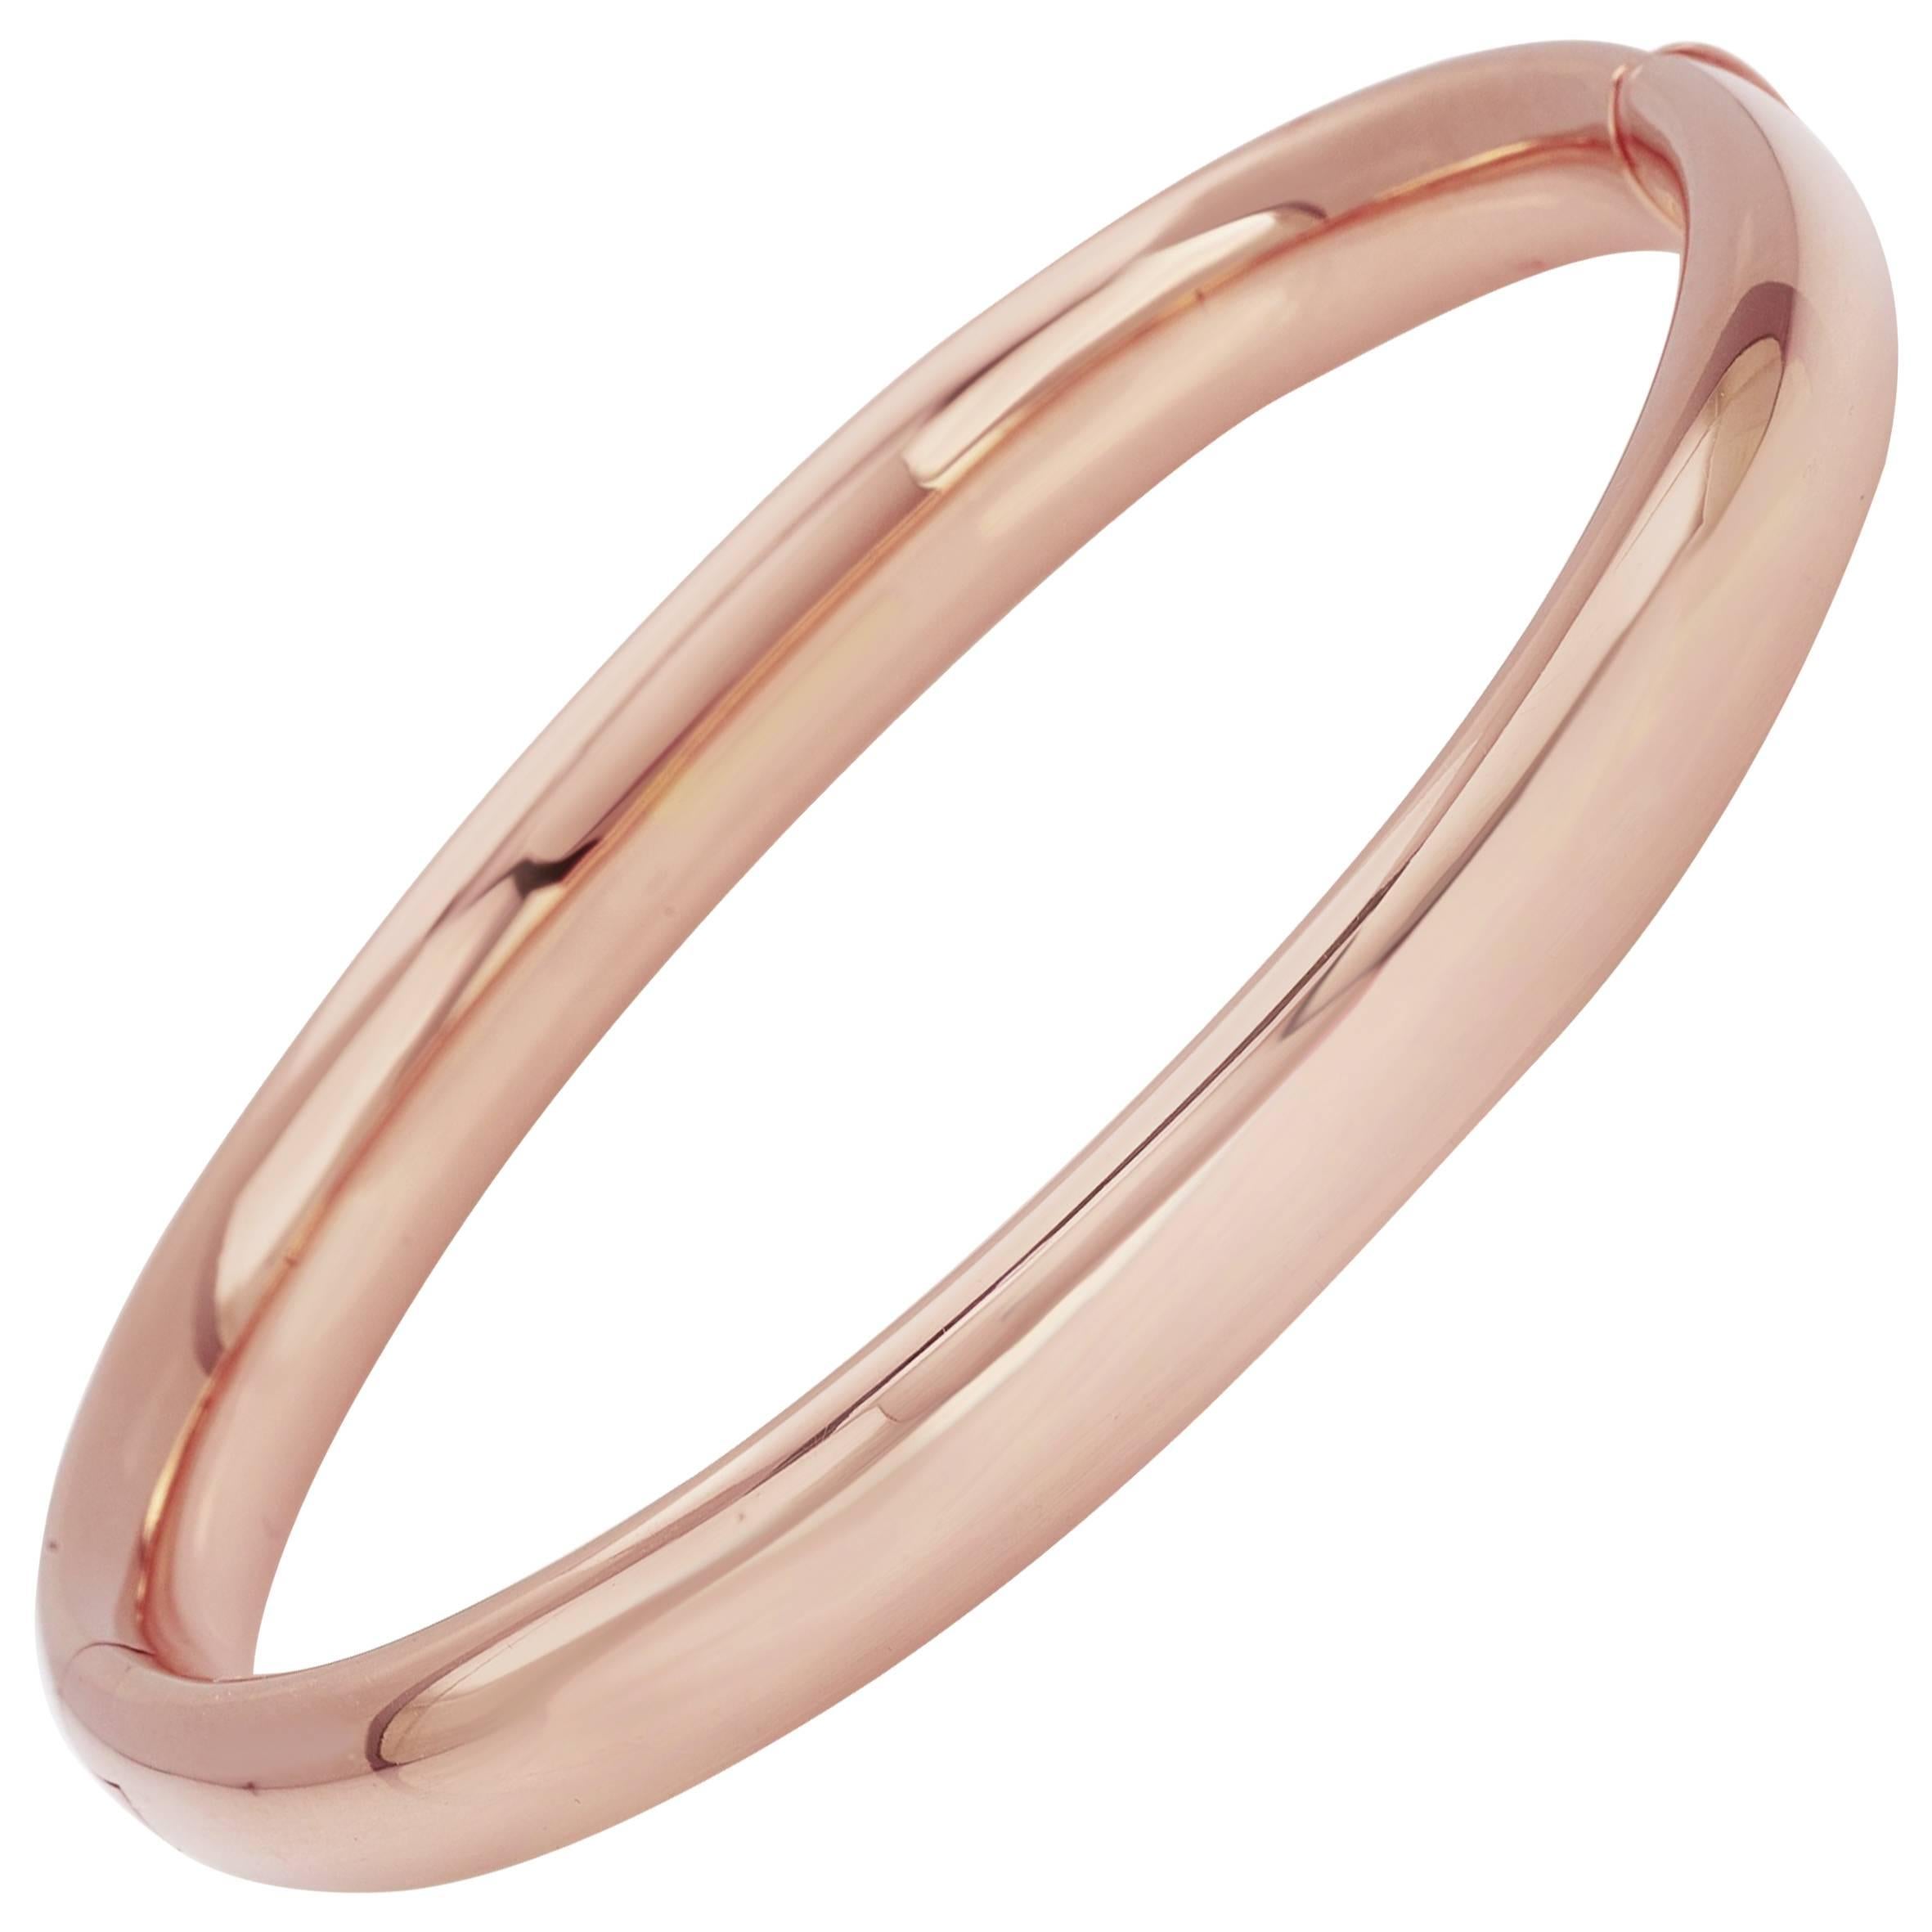 Bangle from the Collection "Essence" 18 Karat Pink Gold